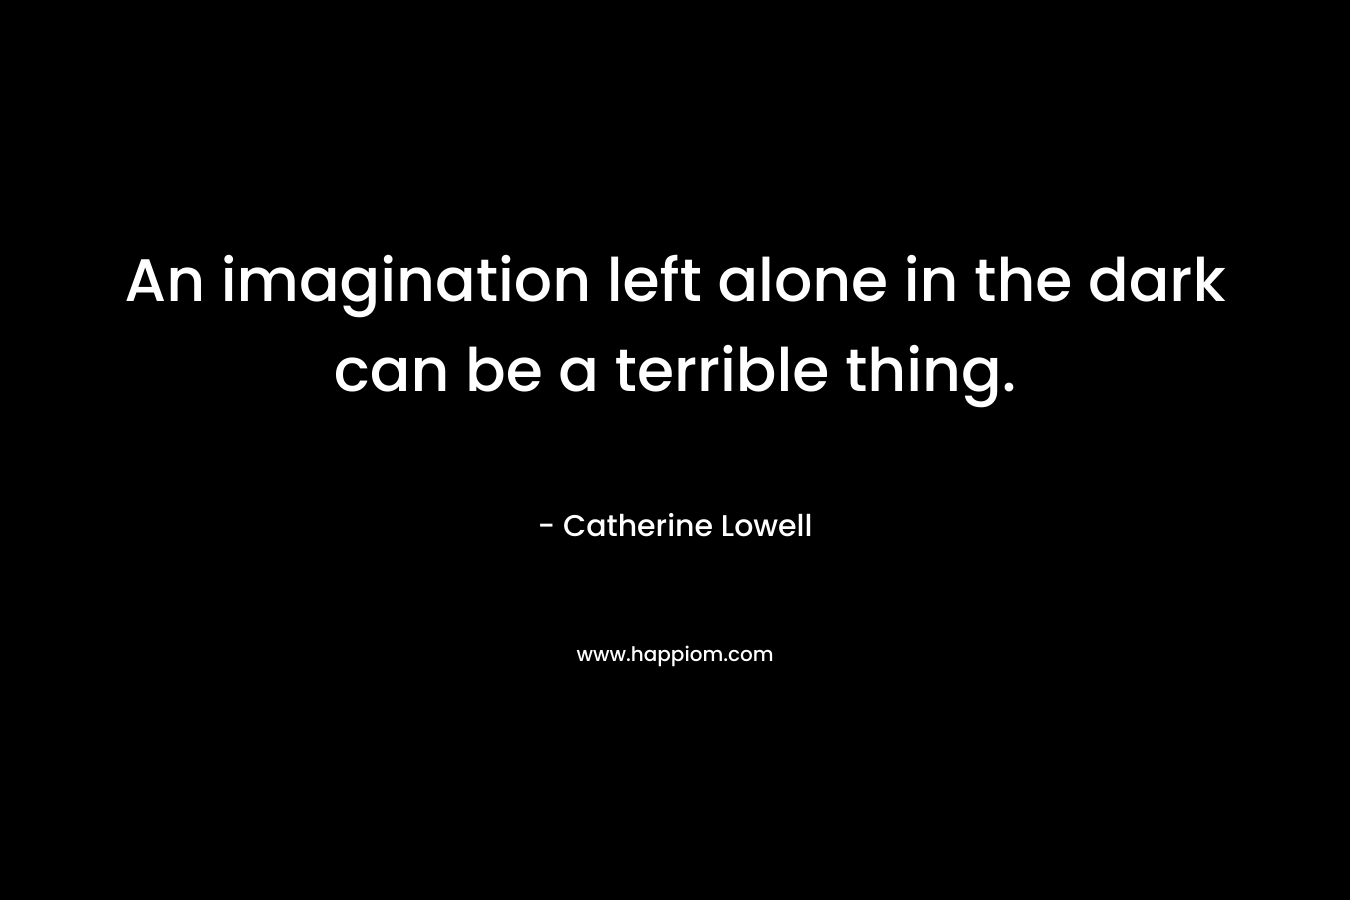 An imagination left alone in the dark can be a terrible thing.